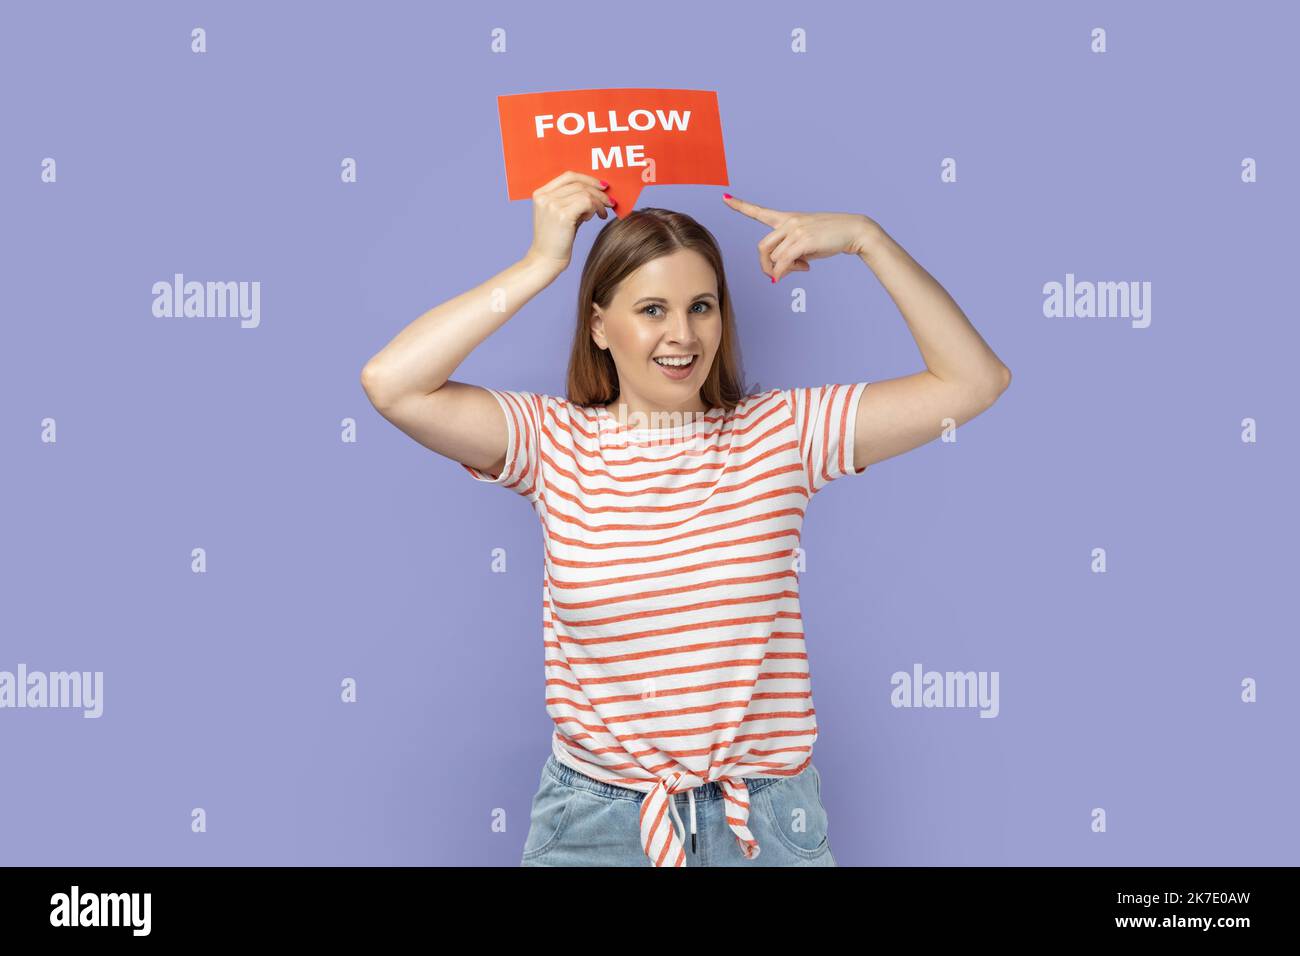 Portrait of delighted smiling blond woman holding red card with follow me inscription above head, pointing at poster, asking to subscribe. Indoor studio shot isolated on purple background. Stock Photo